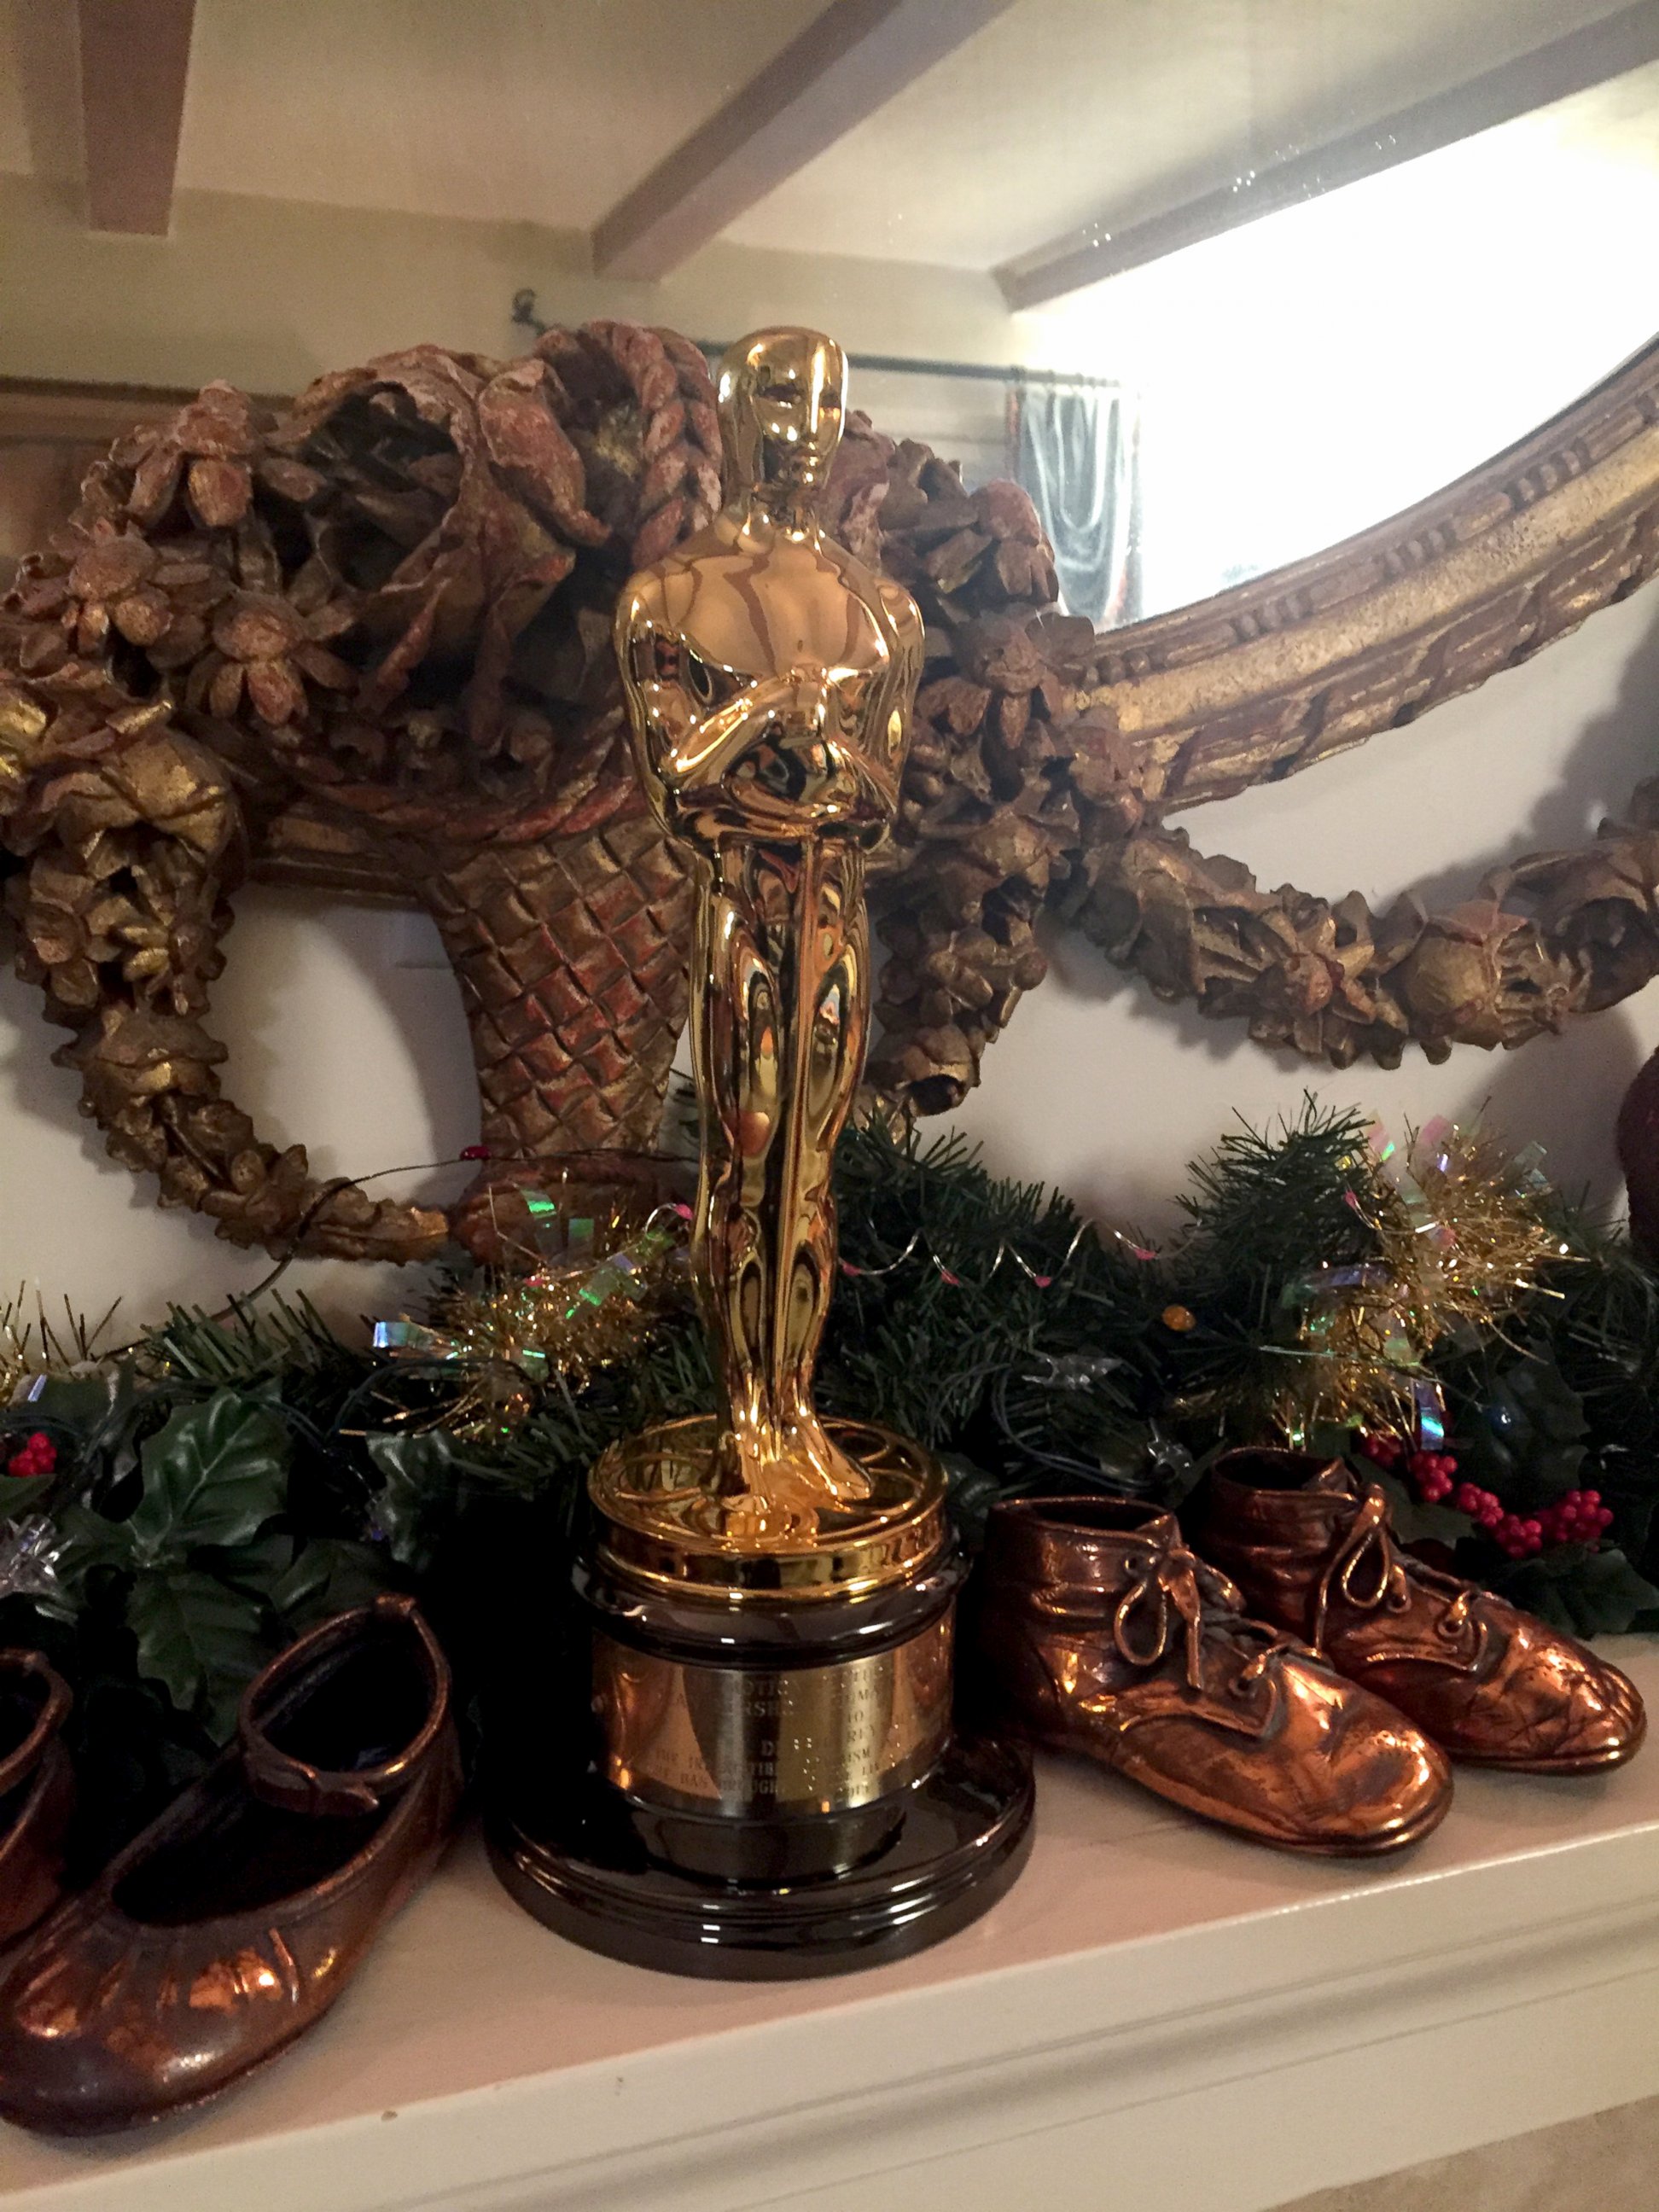 PHOTO: The Jean Hersholt Humanitarian Award that Debbie Reynolds' received from the Academy Award in 2015. 